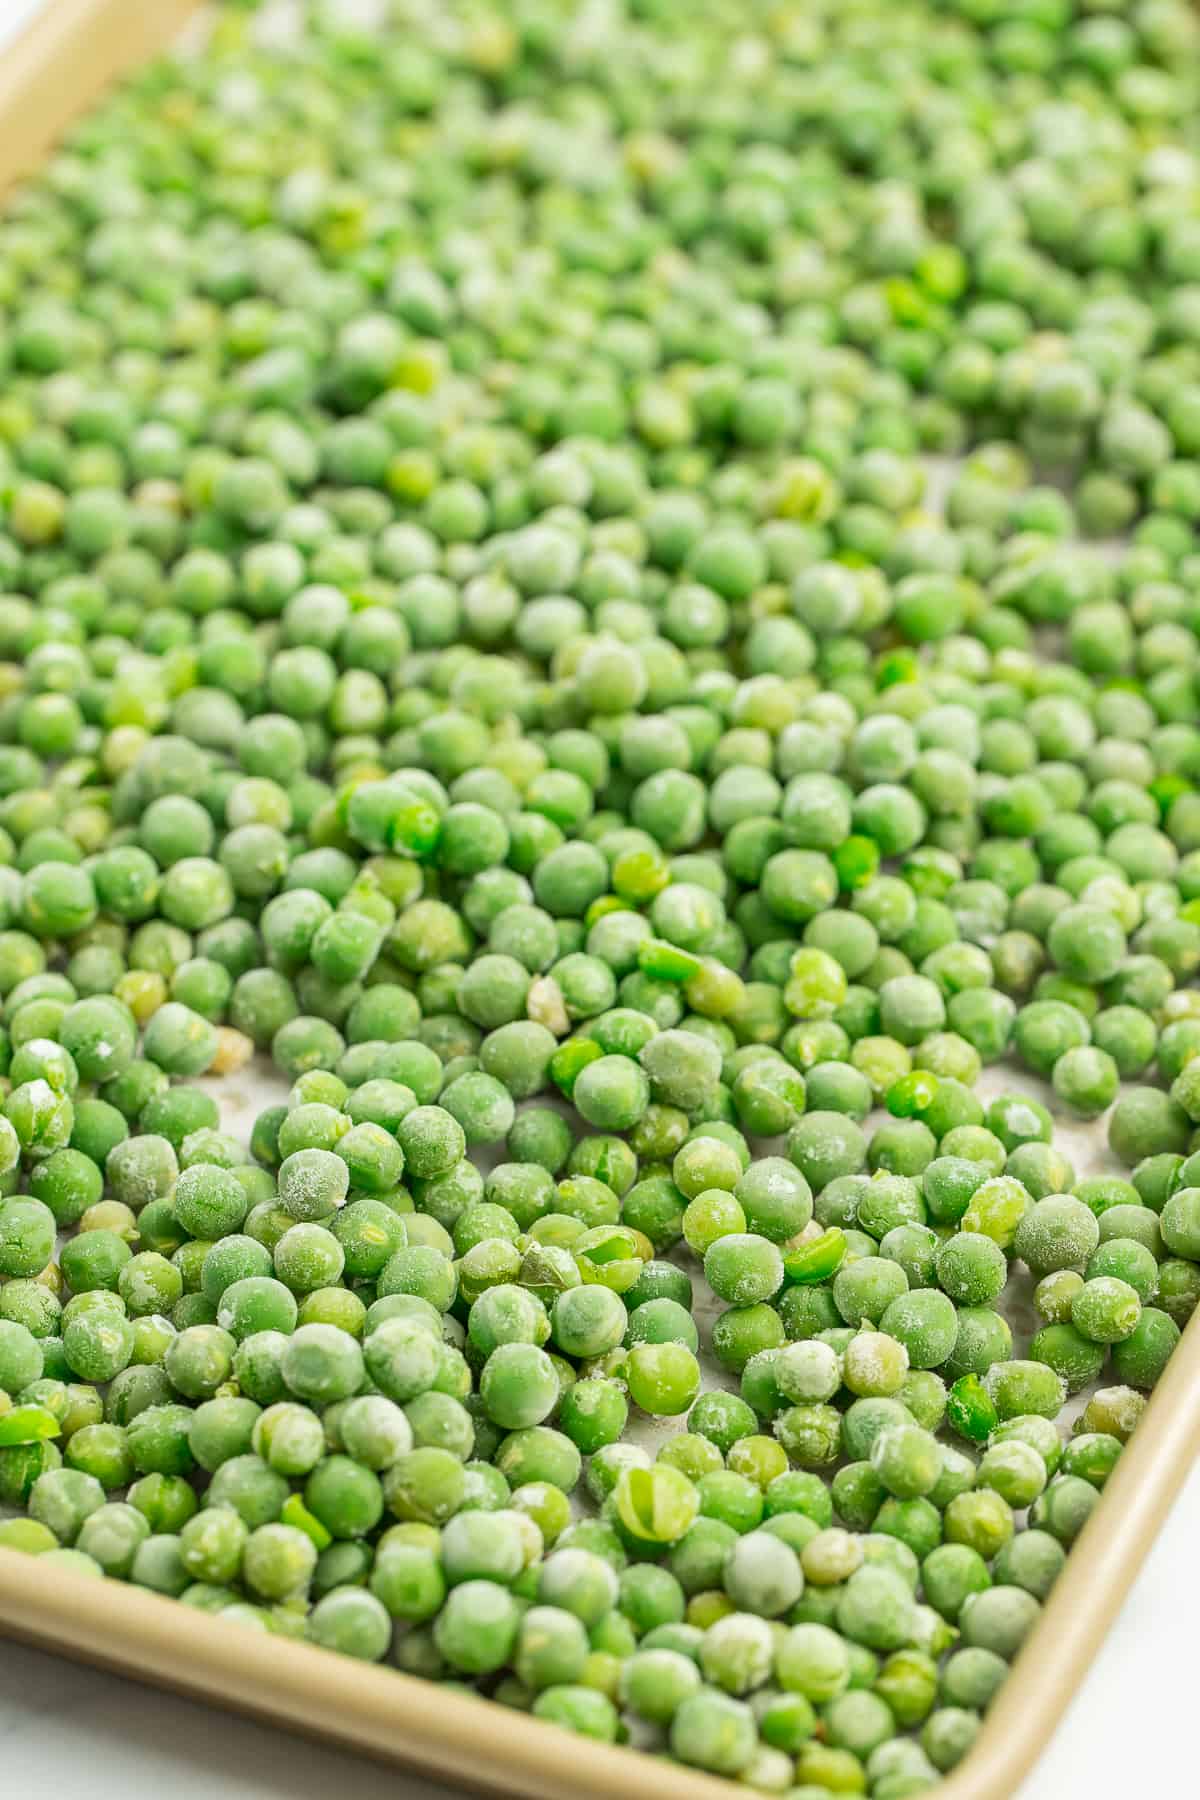 frozen peas on a tray.